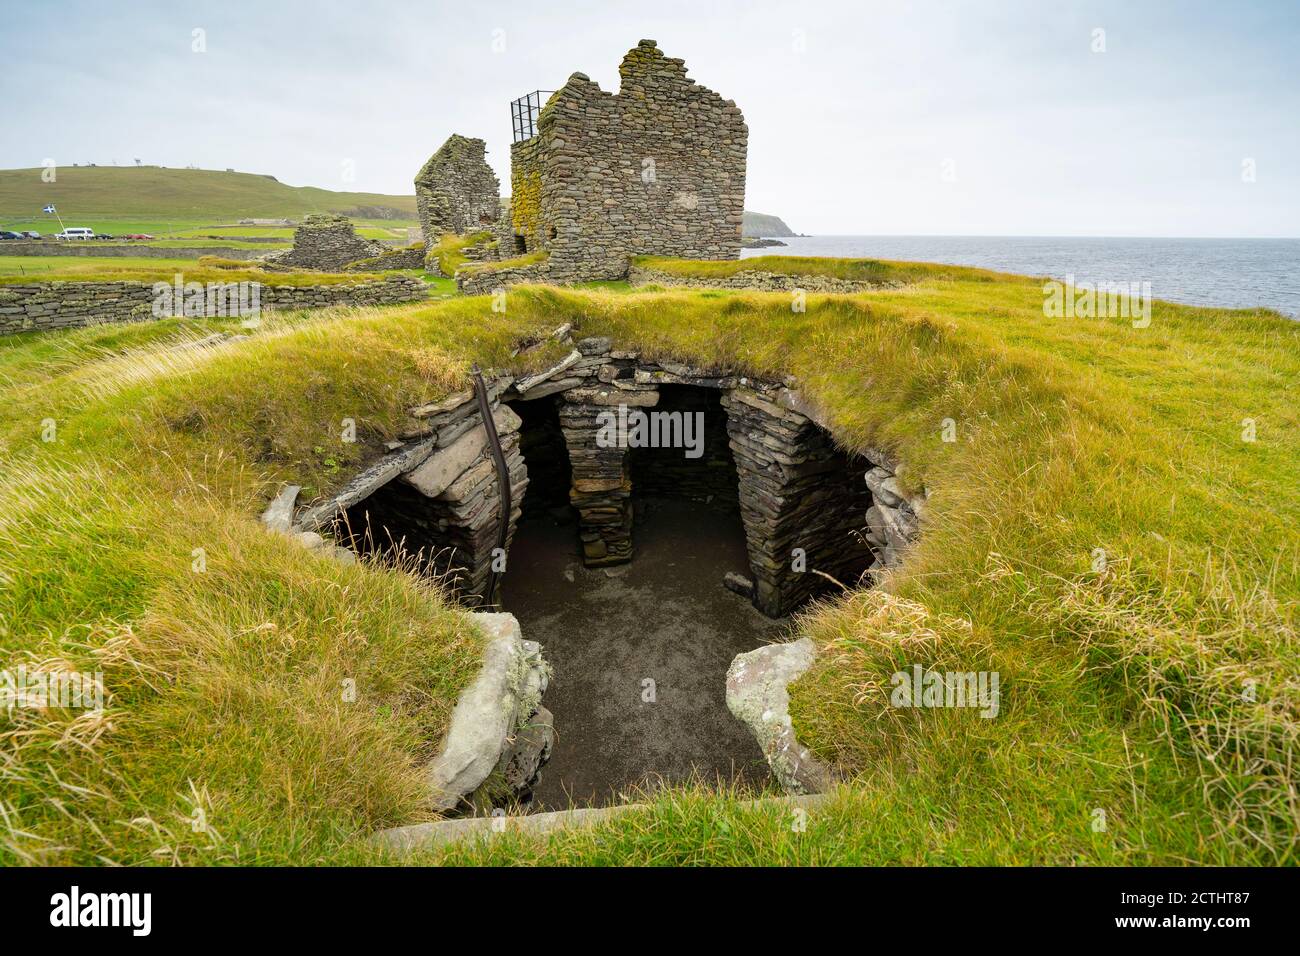 View of archeological site of ancient settlements at Jarlshof in Shetland, Scotland, UK Stock Photo